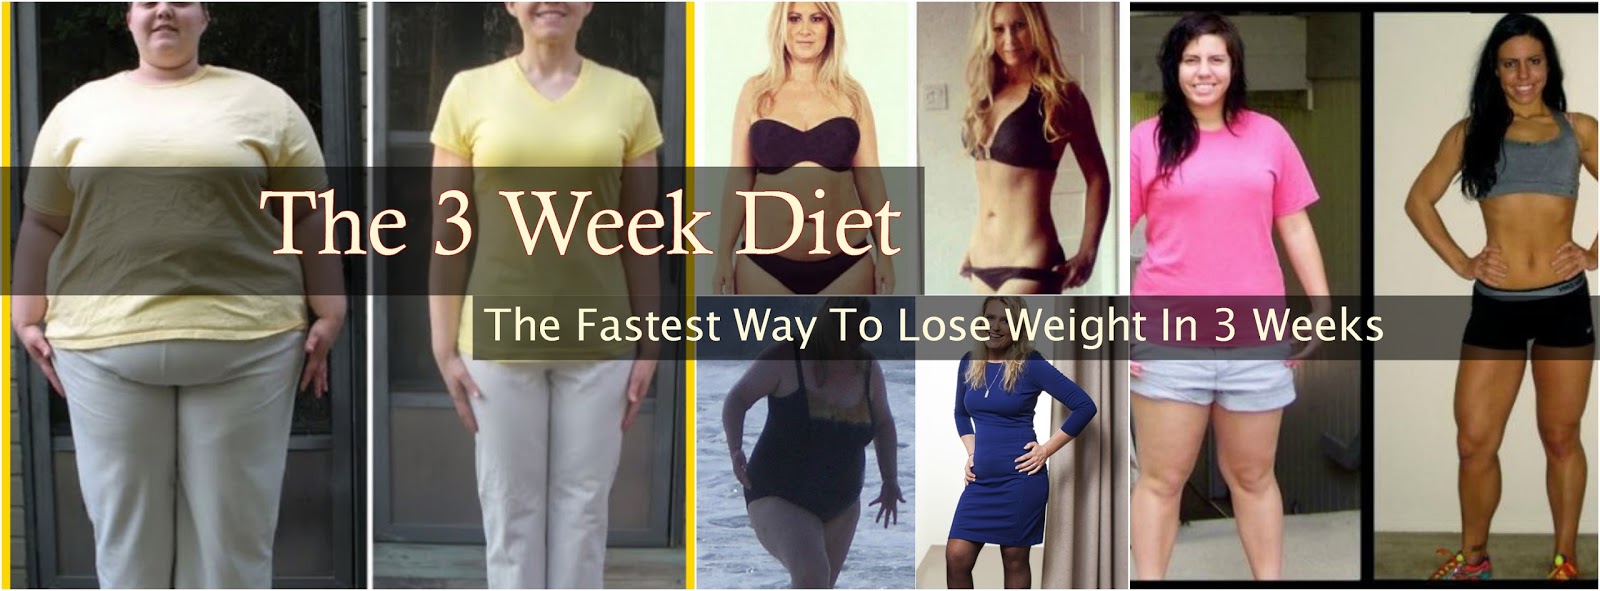 The 3 Weeks Diet The Fastest Way To Lose Weight In 3 Weeks